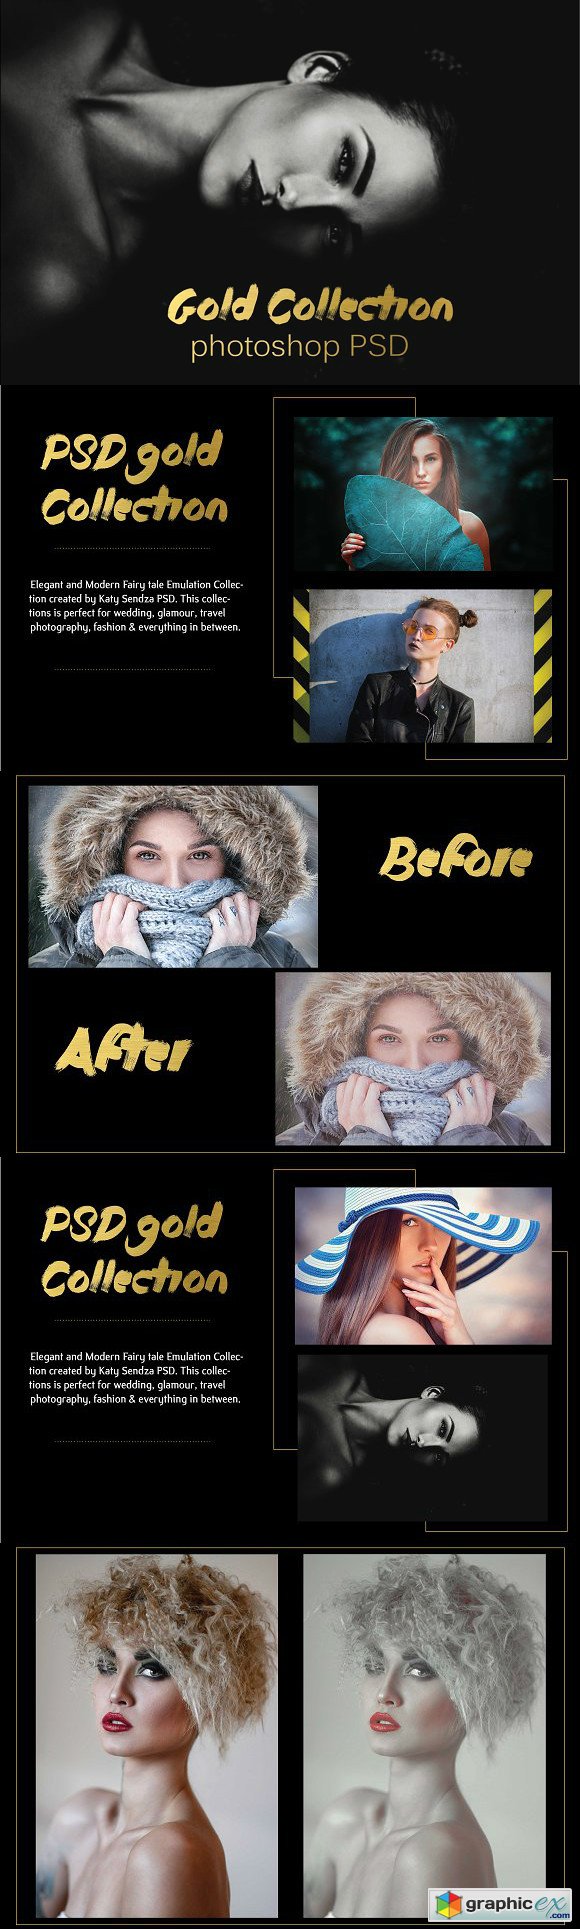 PSD Gold Collection